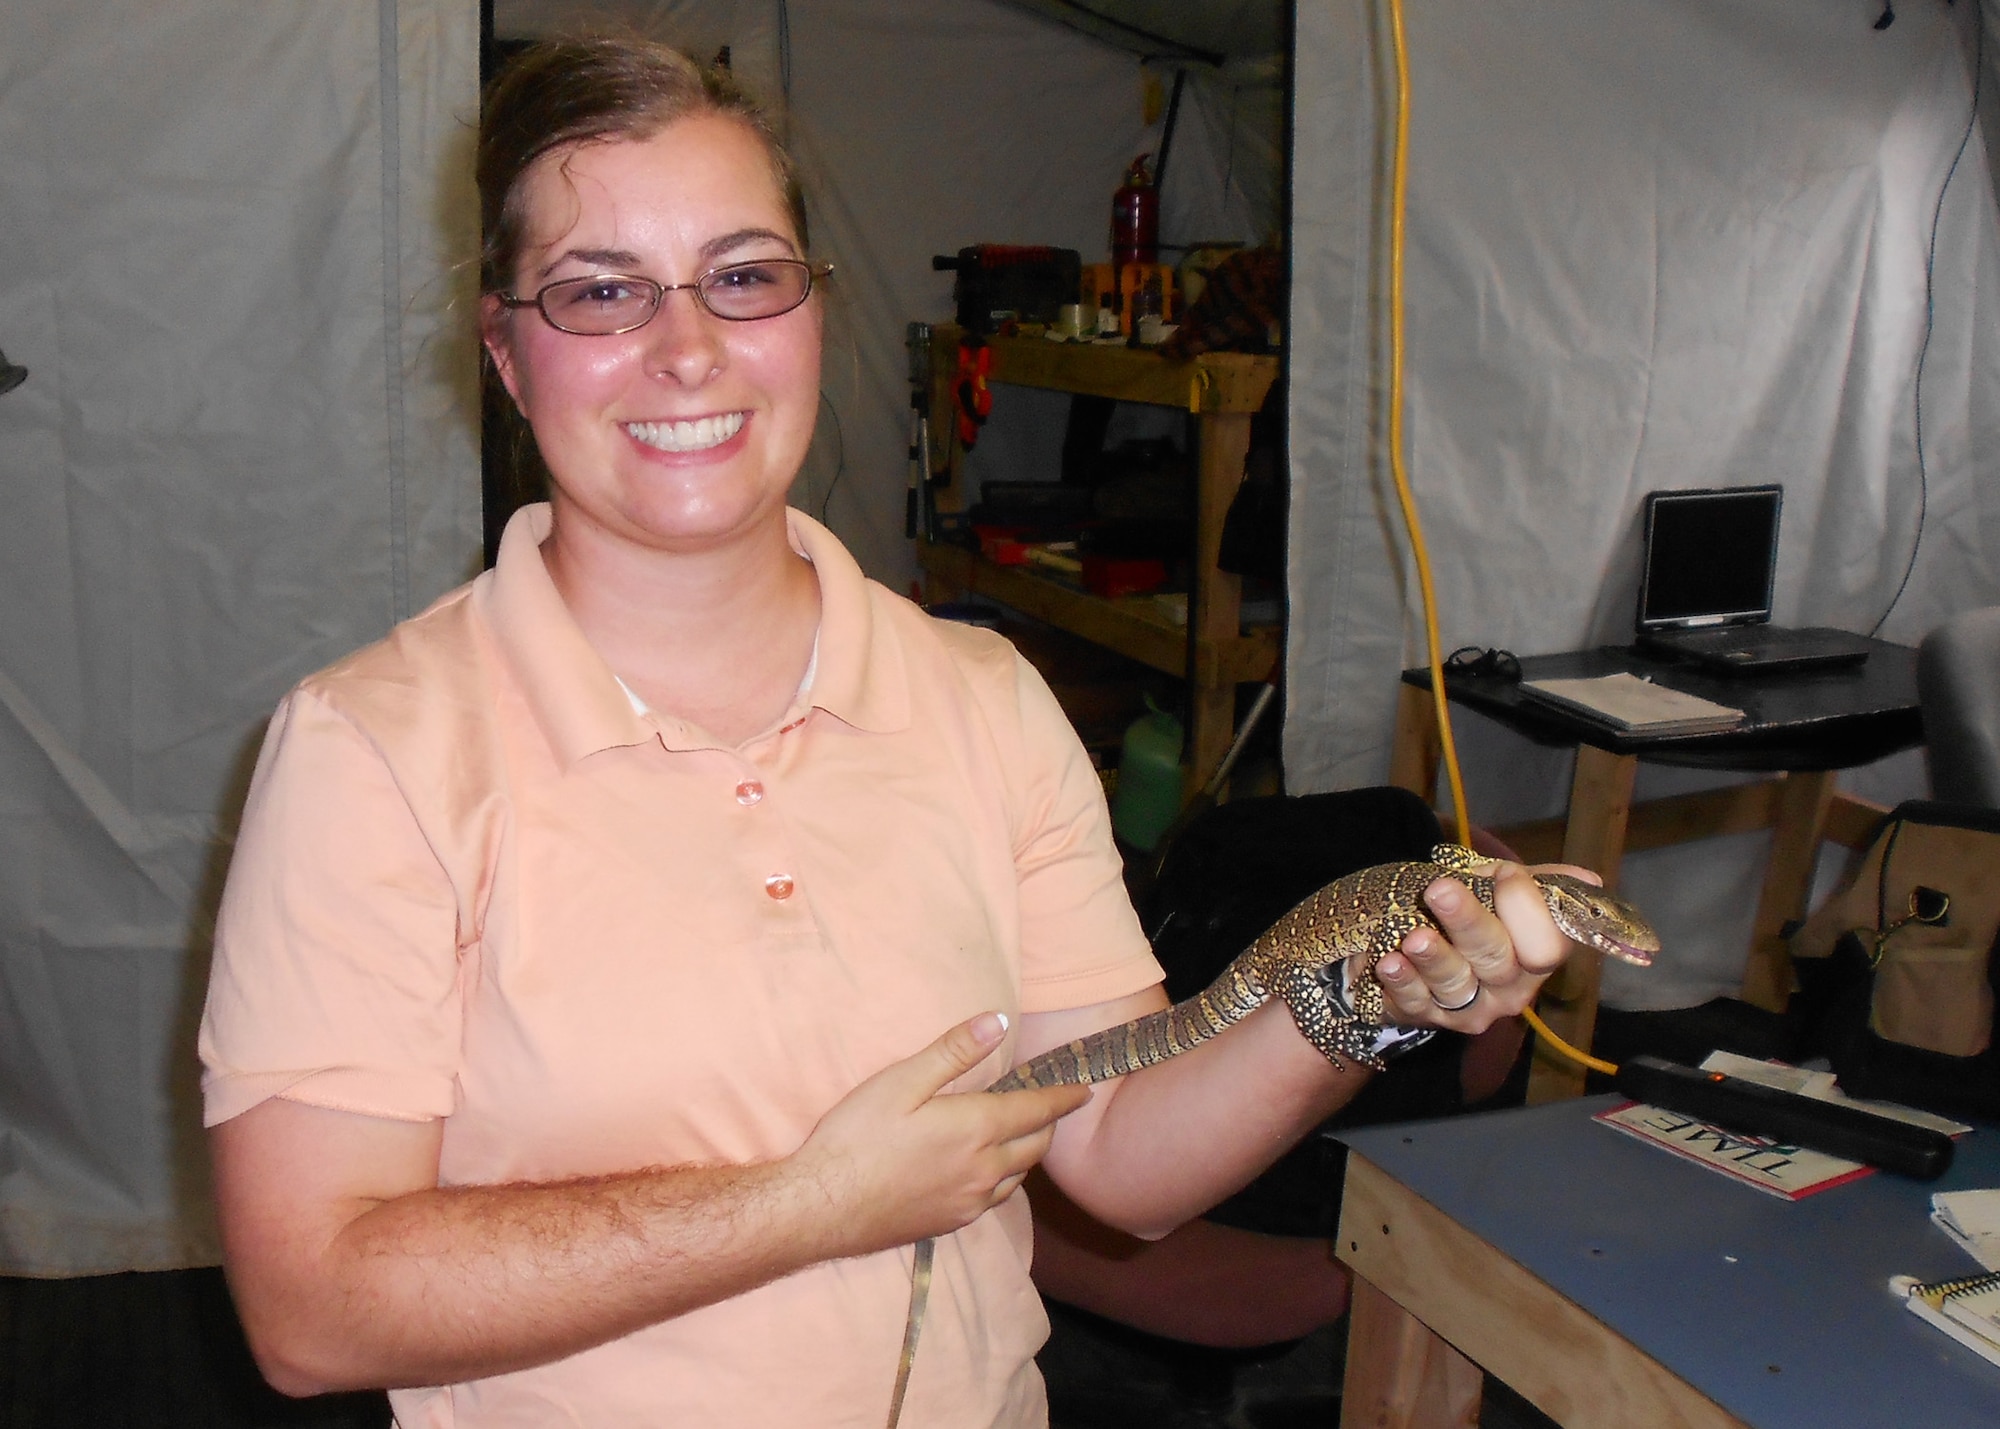 Air Force Reserve Master Sgt. Jennifer Alexander displays a young monitor lizard she recently found at her deployed location.   In her duties as the deployed pest control manager for a U.S. Africa Command forward operating base, the Duke Field civil engineering Airman often works with host nation military officials to eliminate dangerous wildlife hazards and ensure non-threatening wildlife found on and near her base are safely returned to the wild. (Courtesy photo)